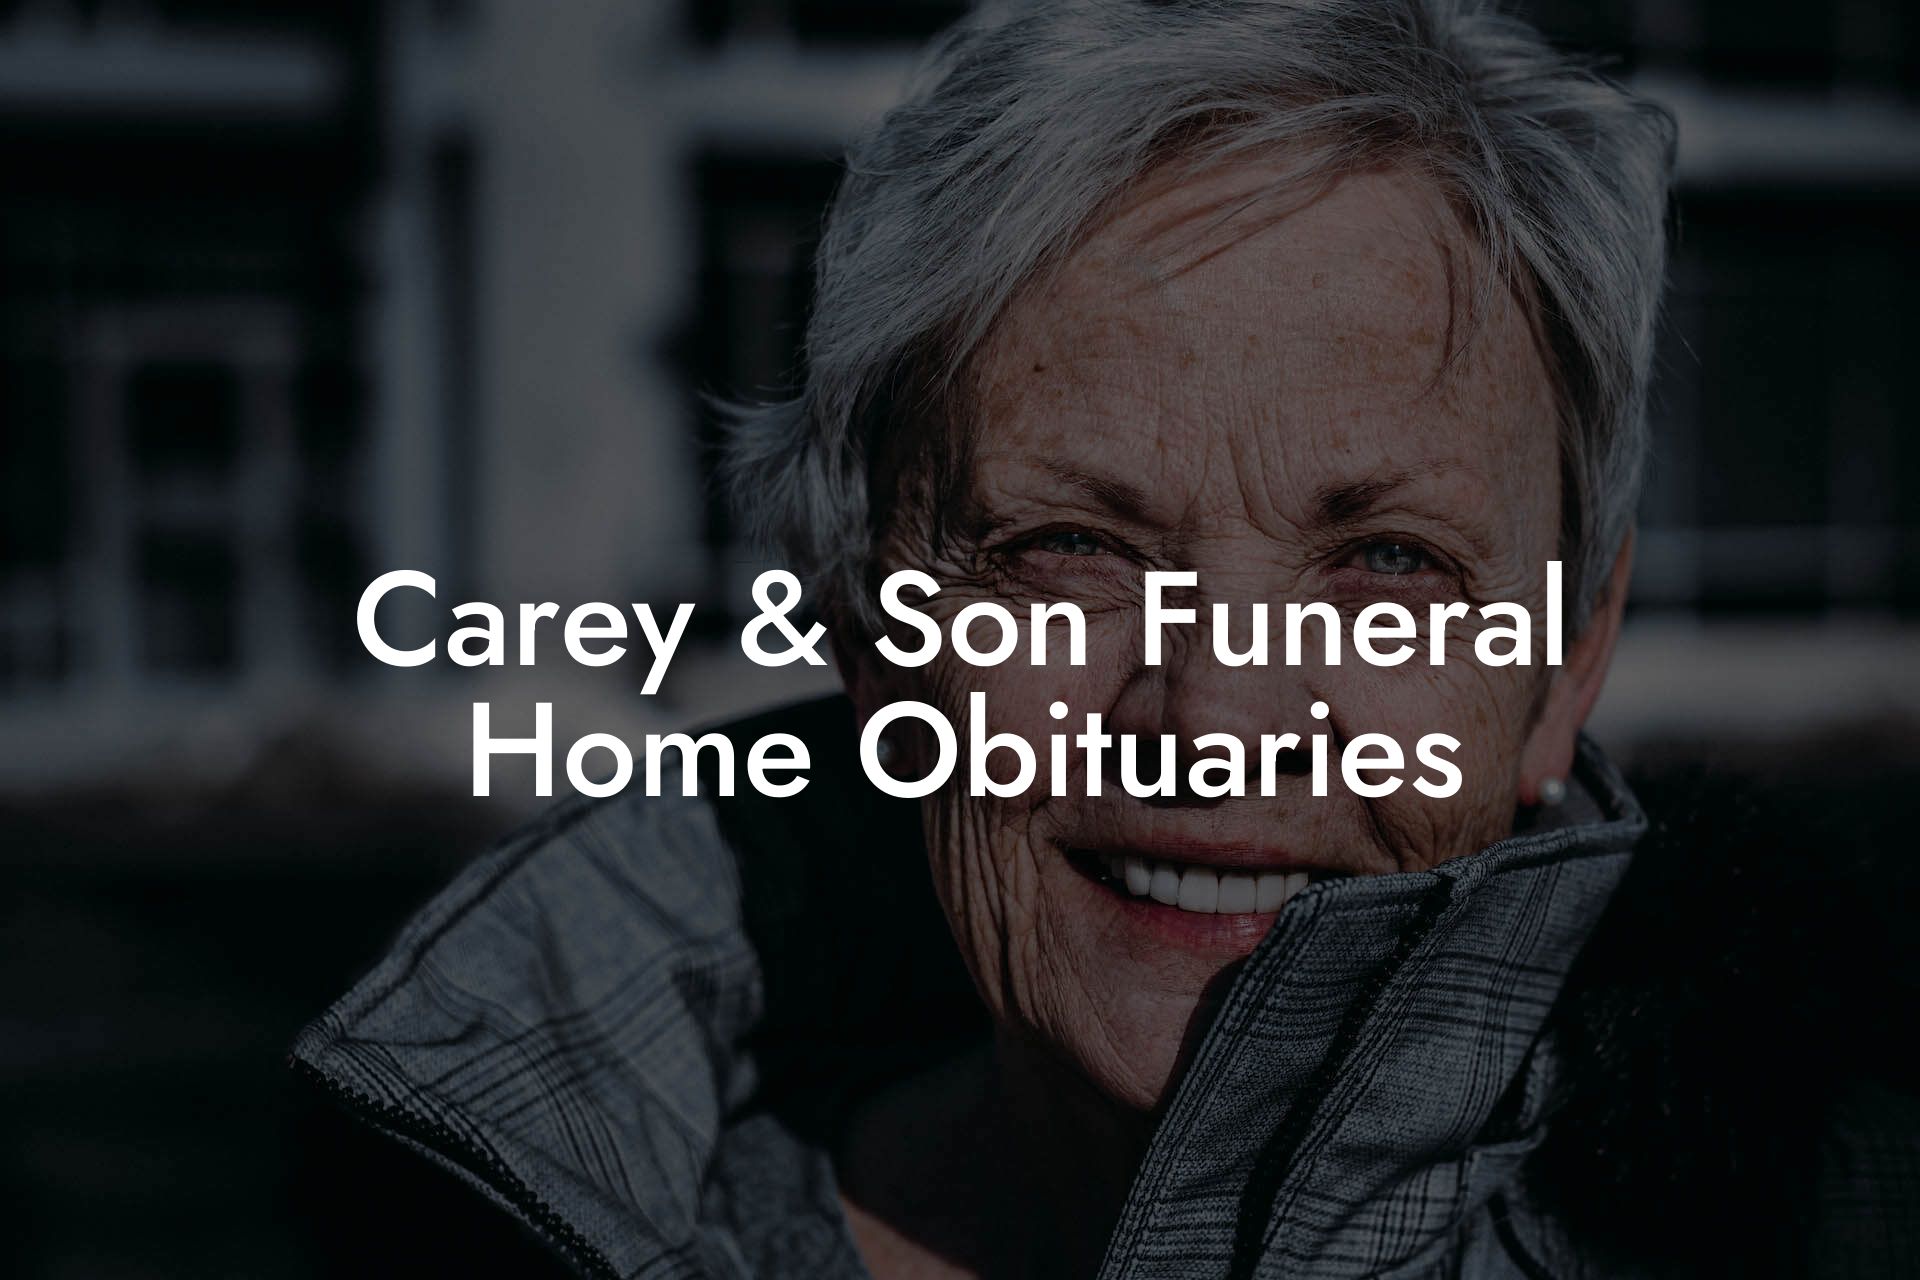 Carey & Son Funeral Home Obituaries